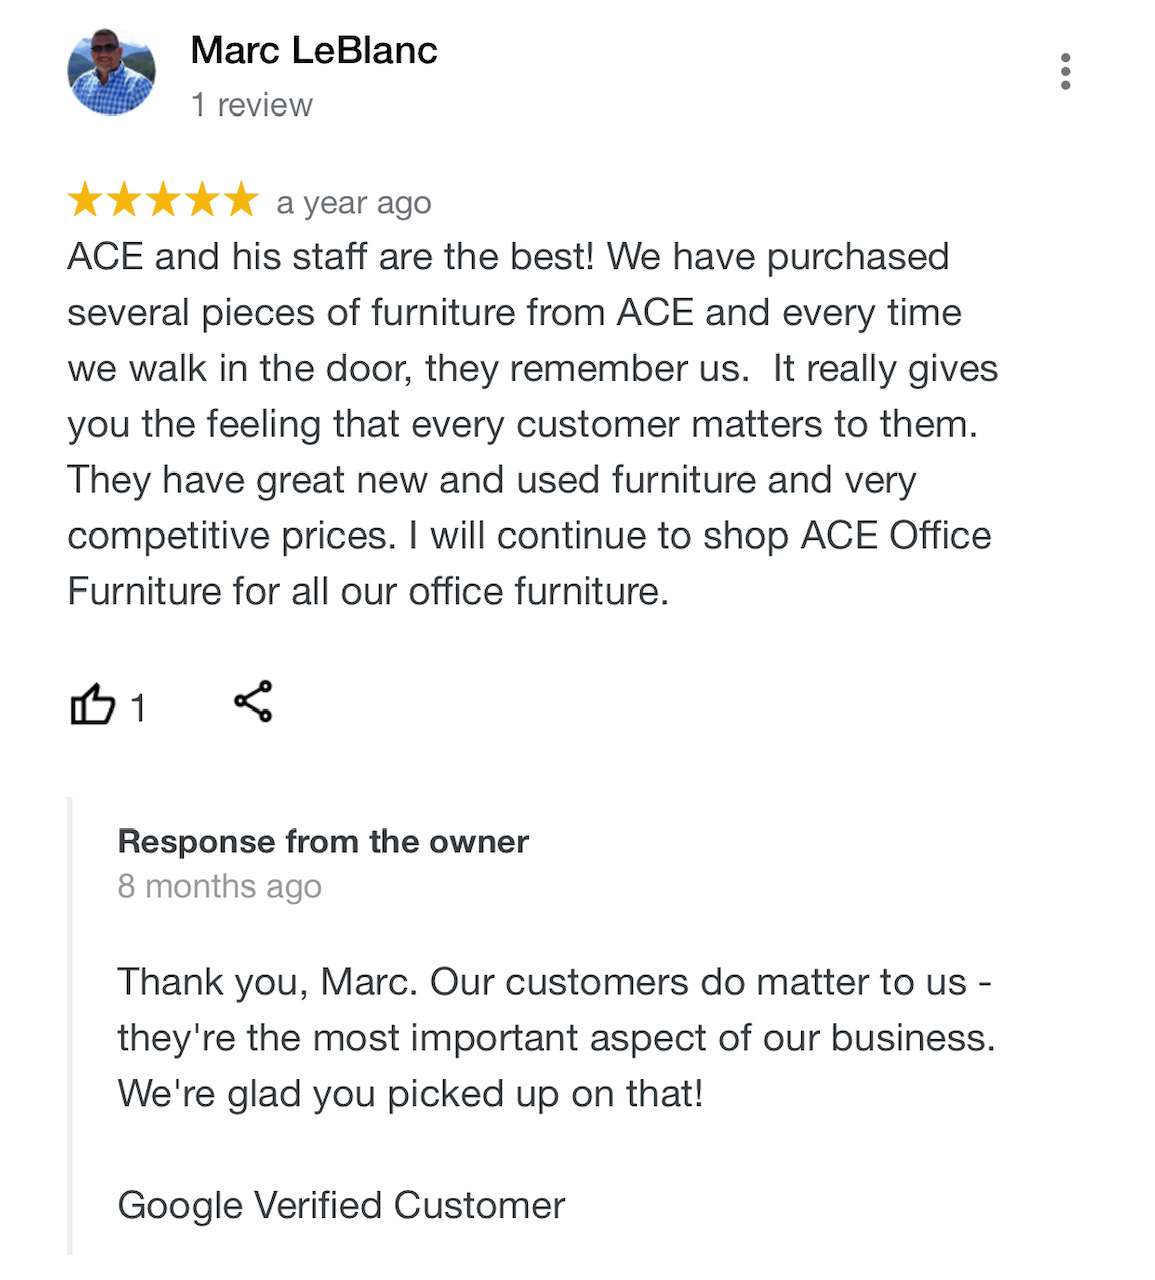 ACE and his staff are the best! We have purchased several pieces of furniture from ACE and every time we walk in the door, they remember us. It really gices you the feeling that every customer matters to them. They have great new and used furniture and very competitive prices. I will continue to shop ACE Office Furniture for all our office furniture. Marc LeBlanc